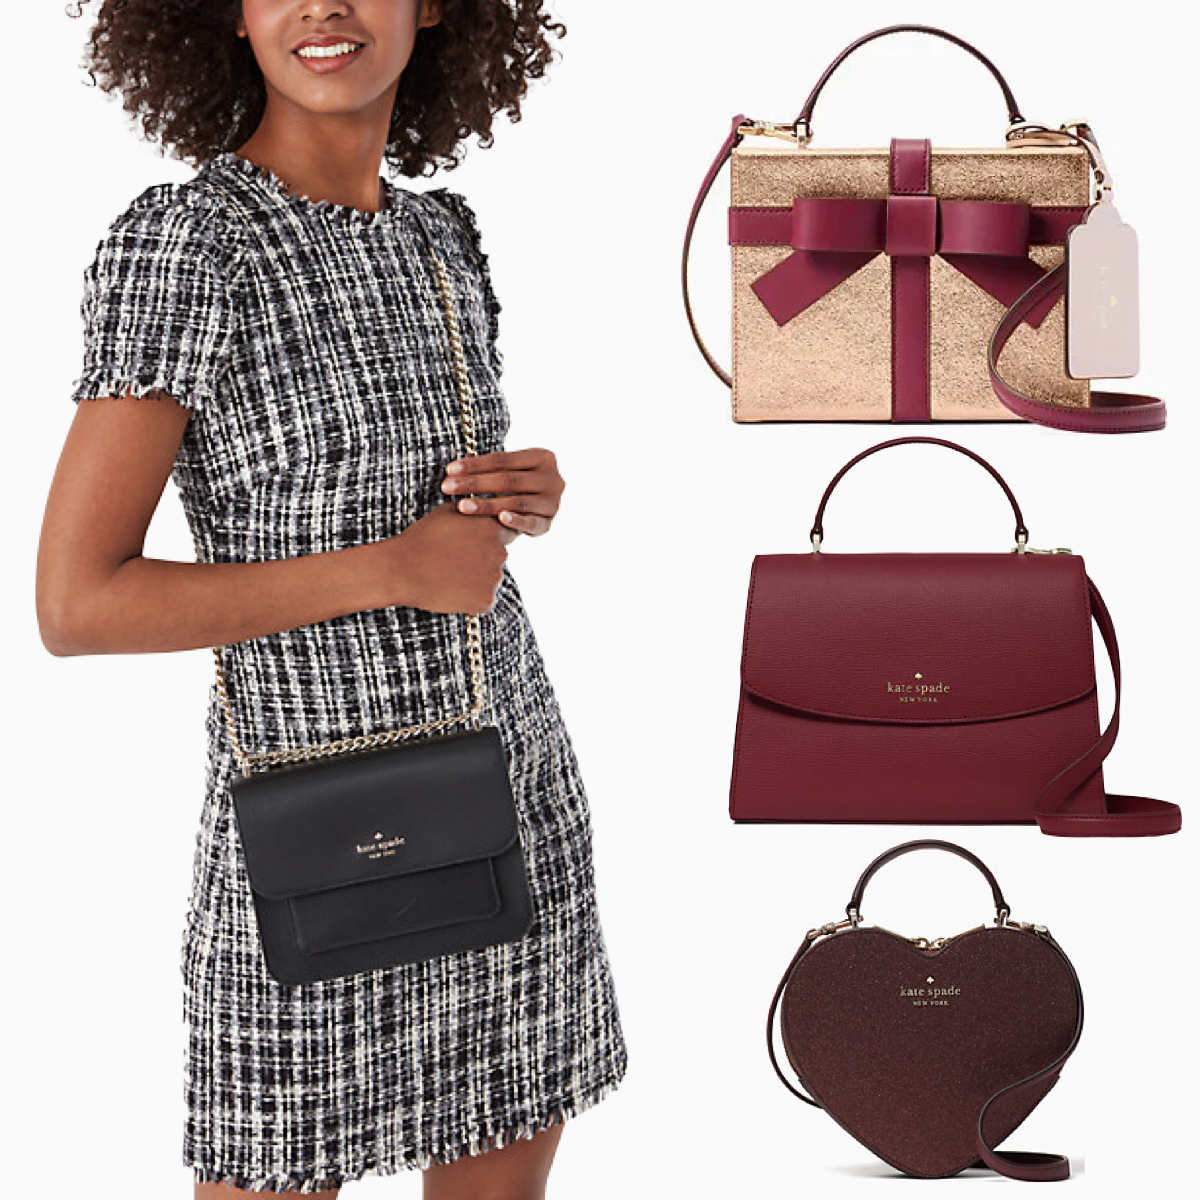 Kate Spade's Surprise Holiday Sale: Save Up to 75% Off Everything!